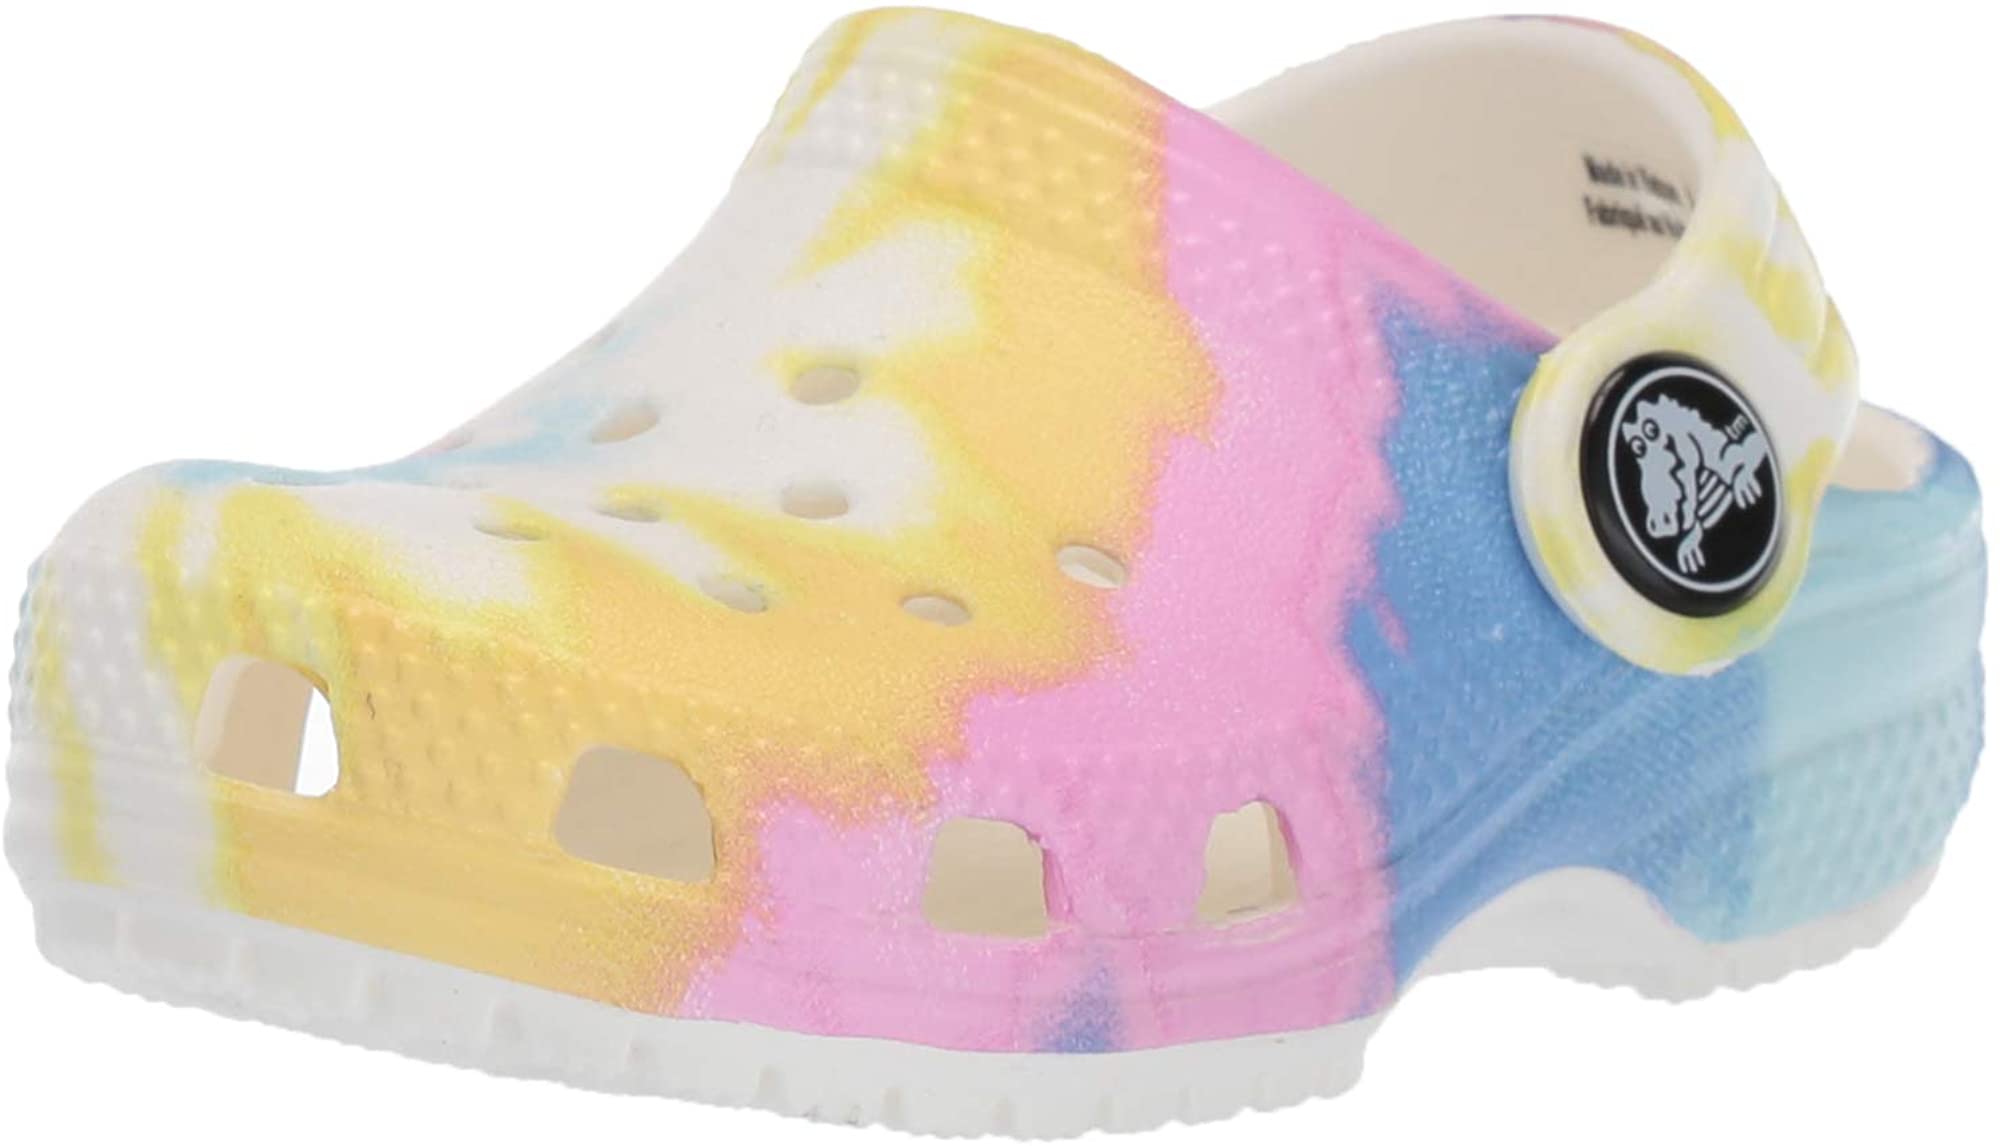 Crocs Kids Classic Graphic Clog Slip on Water Shoes